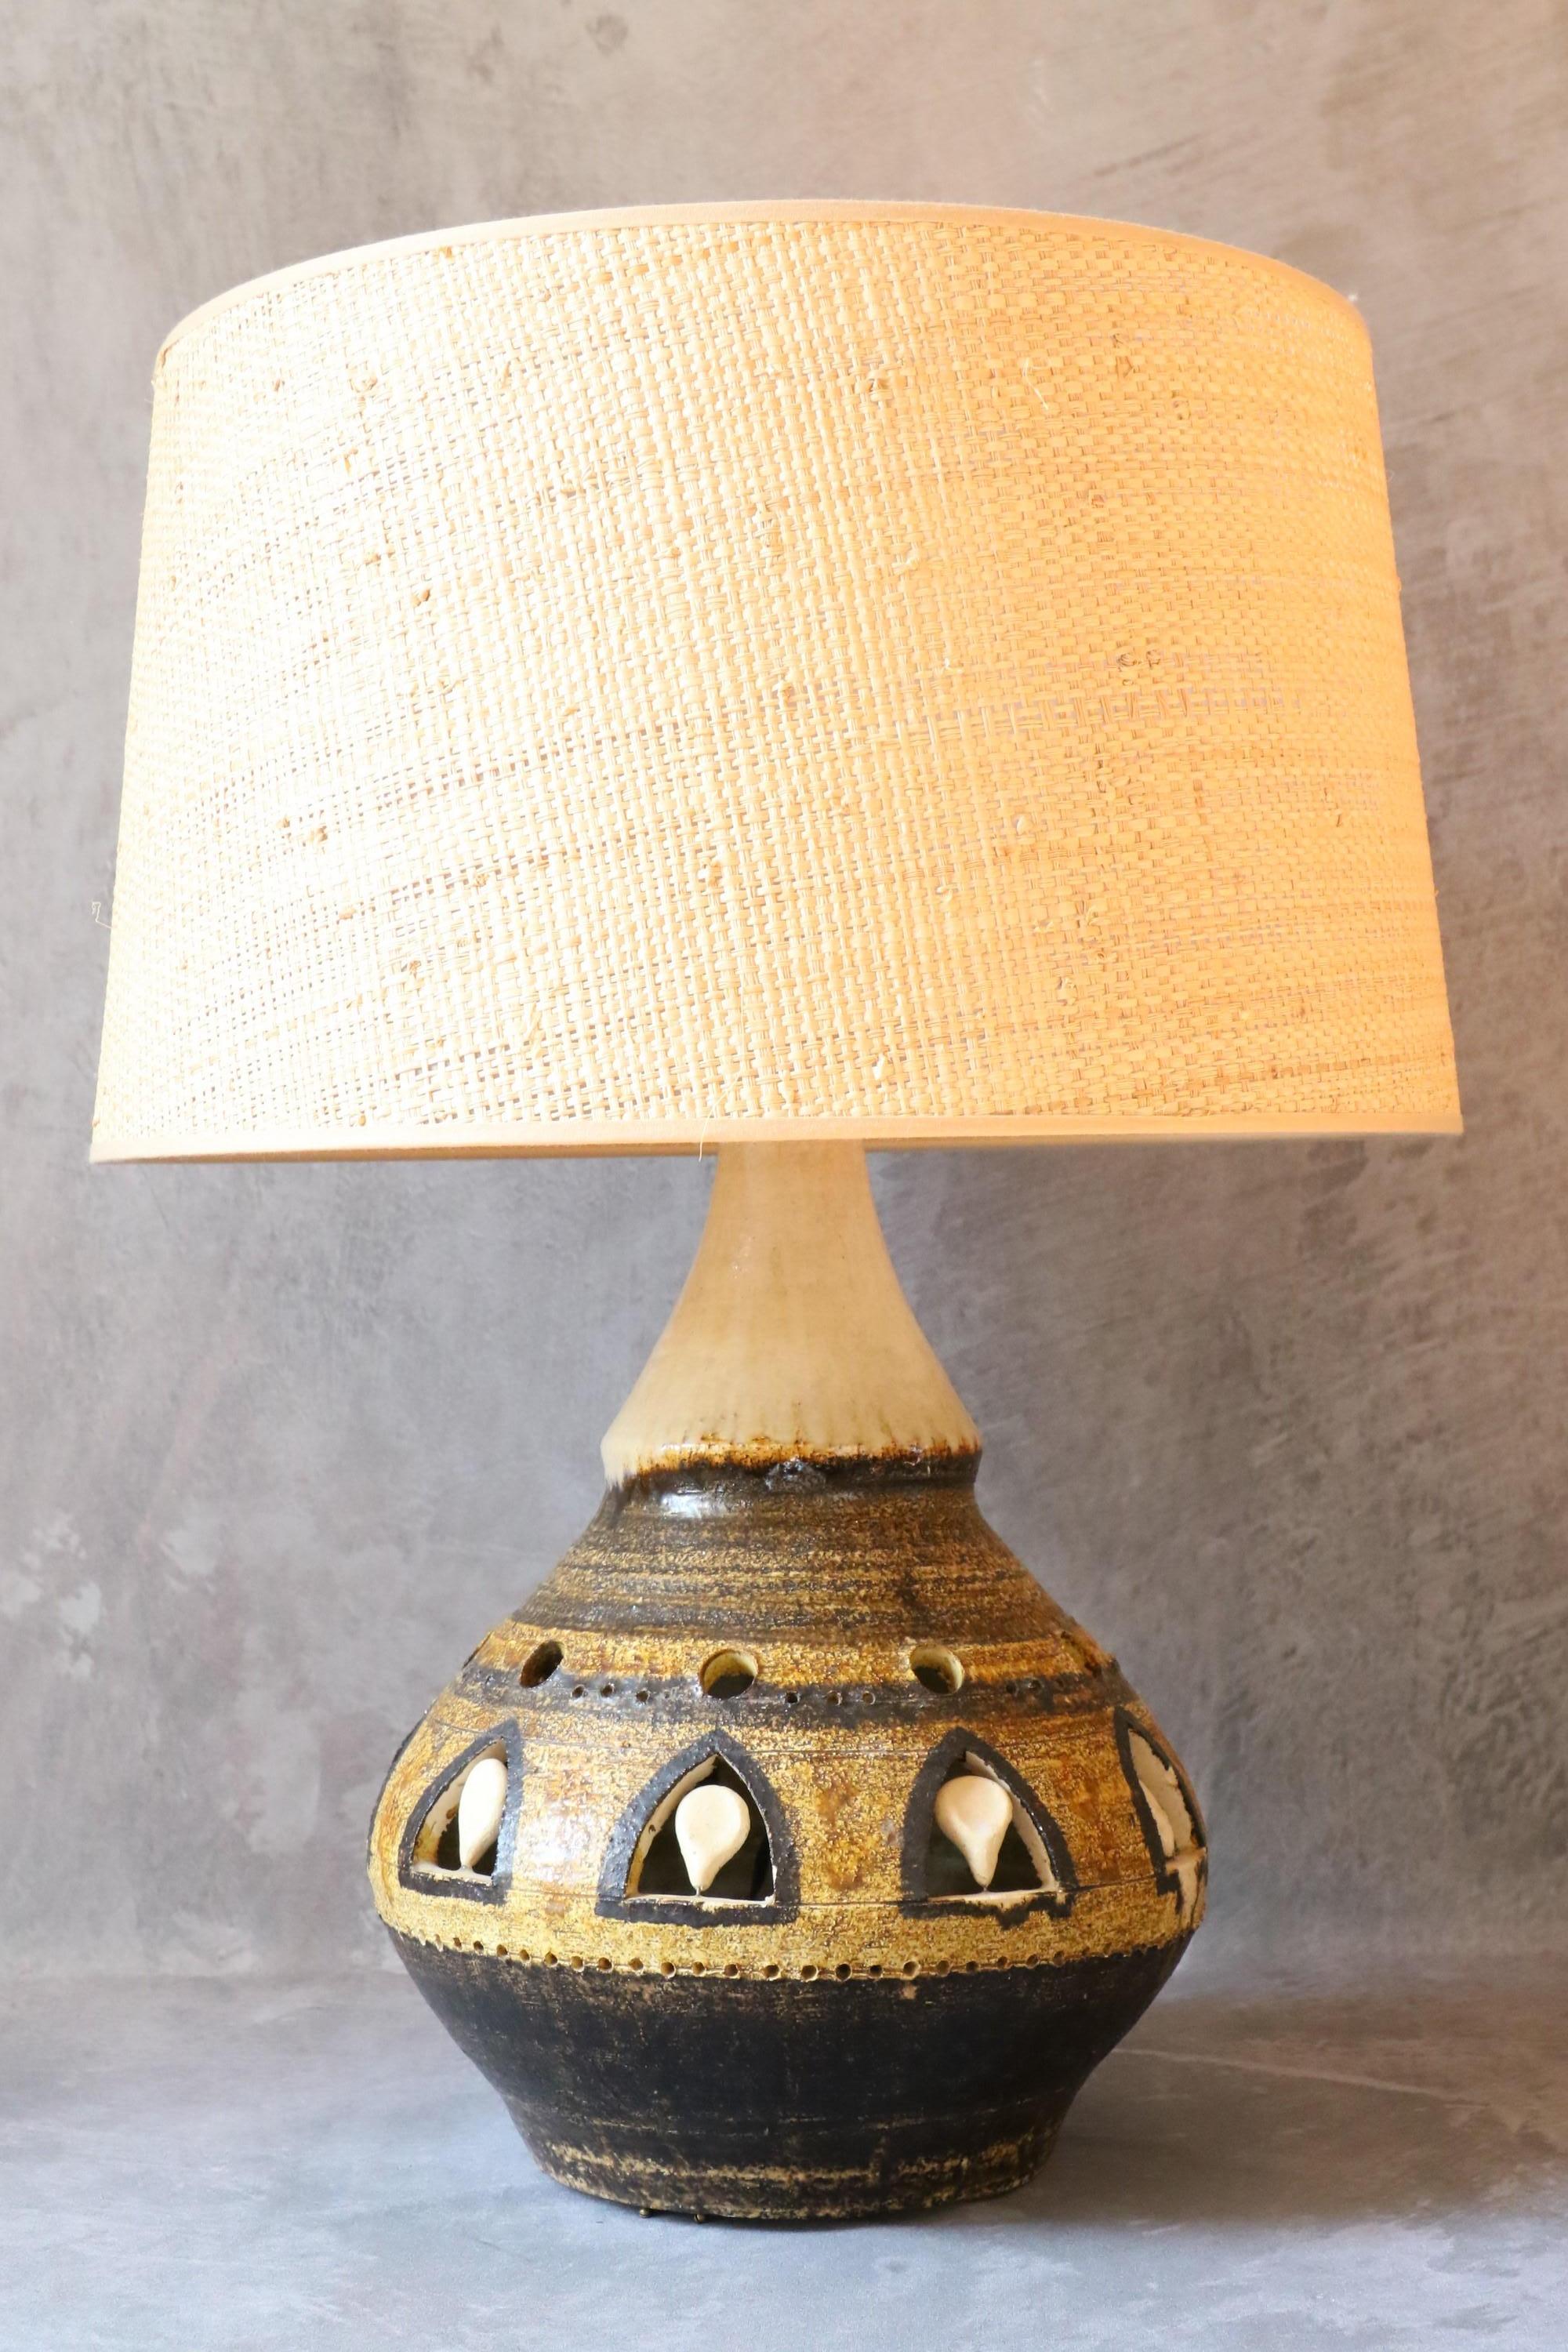 Massive double Lighting Ceramic Lamp by Georges Pelletier, 1970s, France

It is a beautiful ceramic lamp. It offers a double lighting since a second bulb is inside the lamp base. The light is very soft and allows to highlight the characteristic